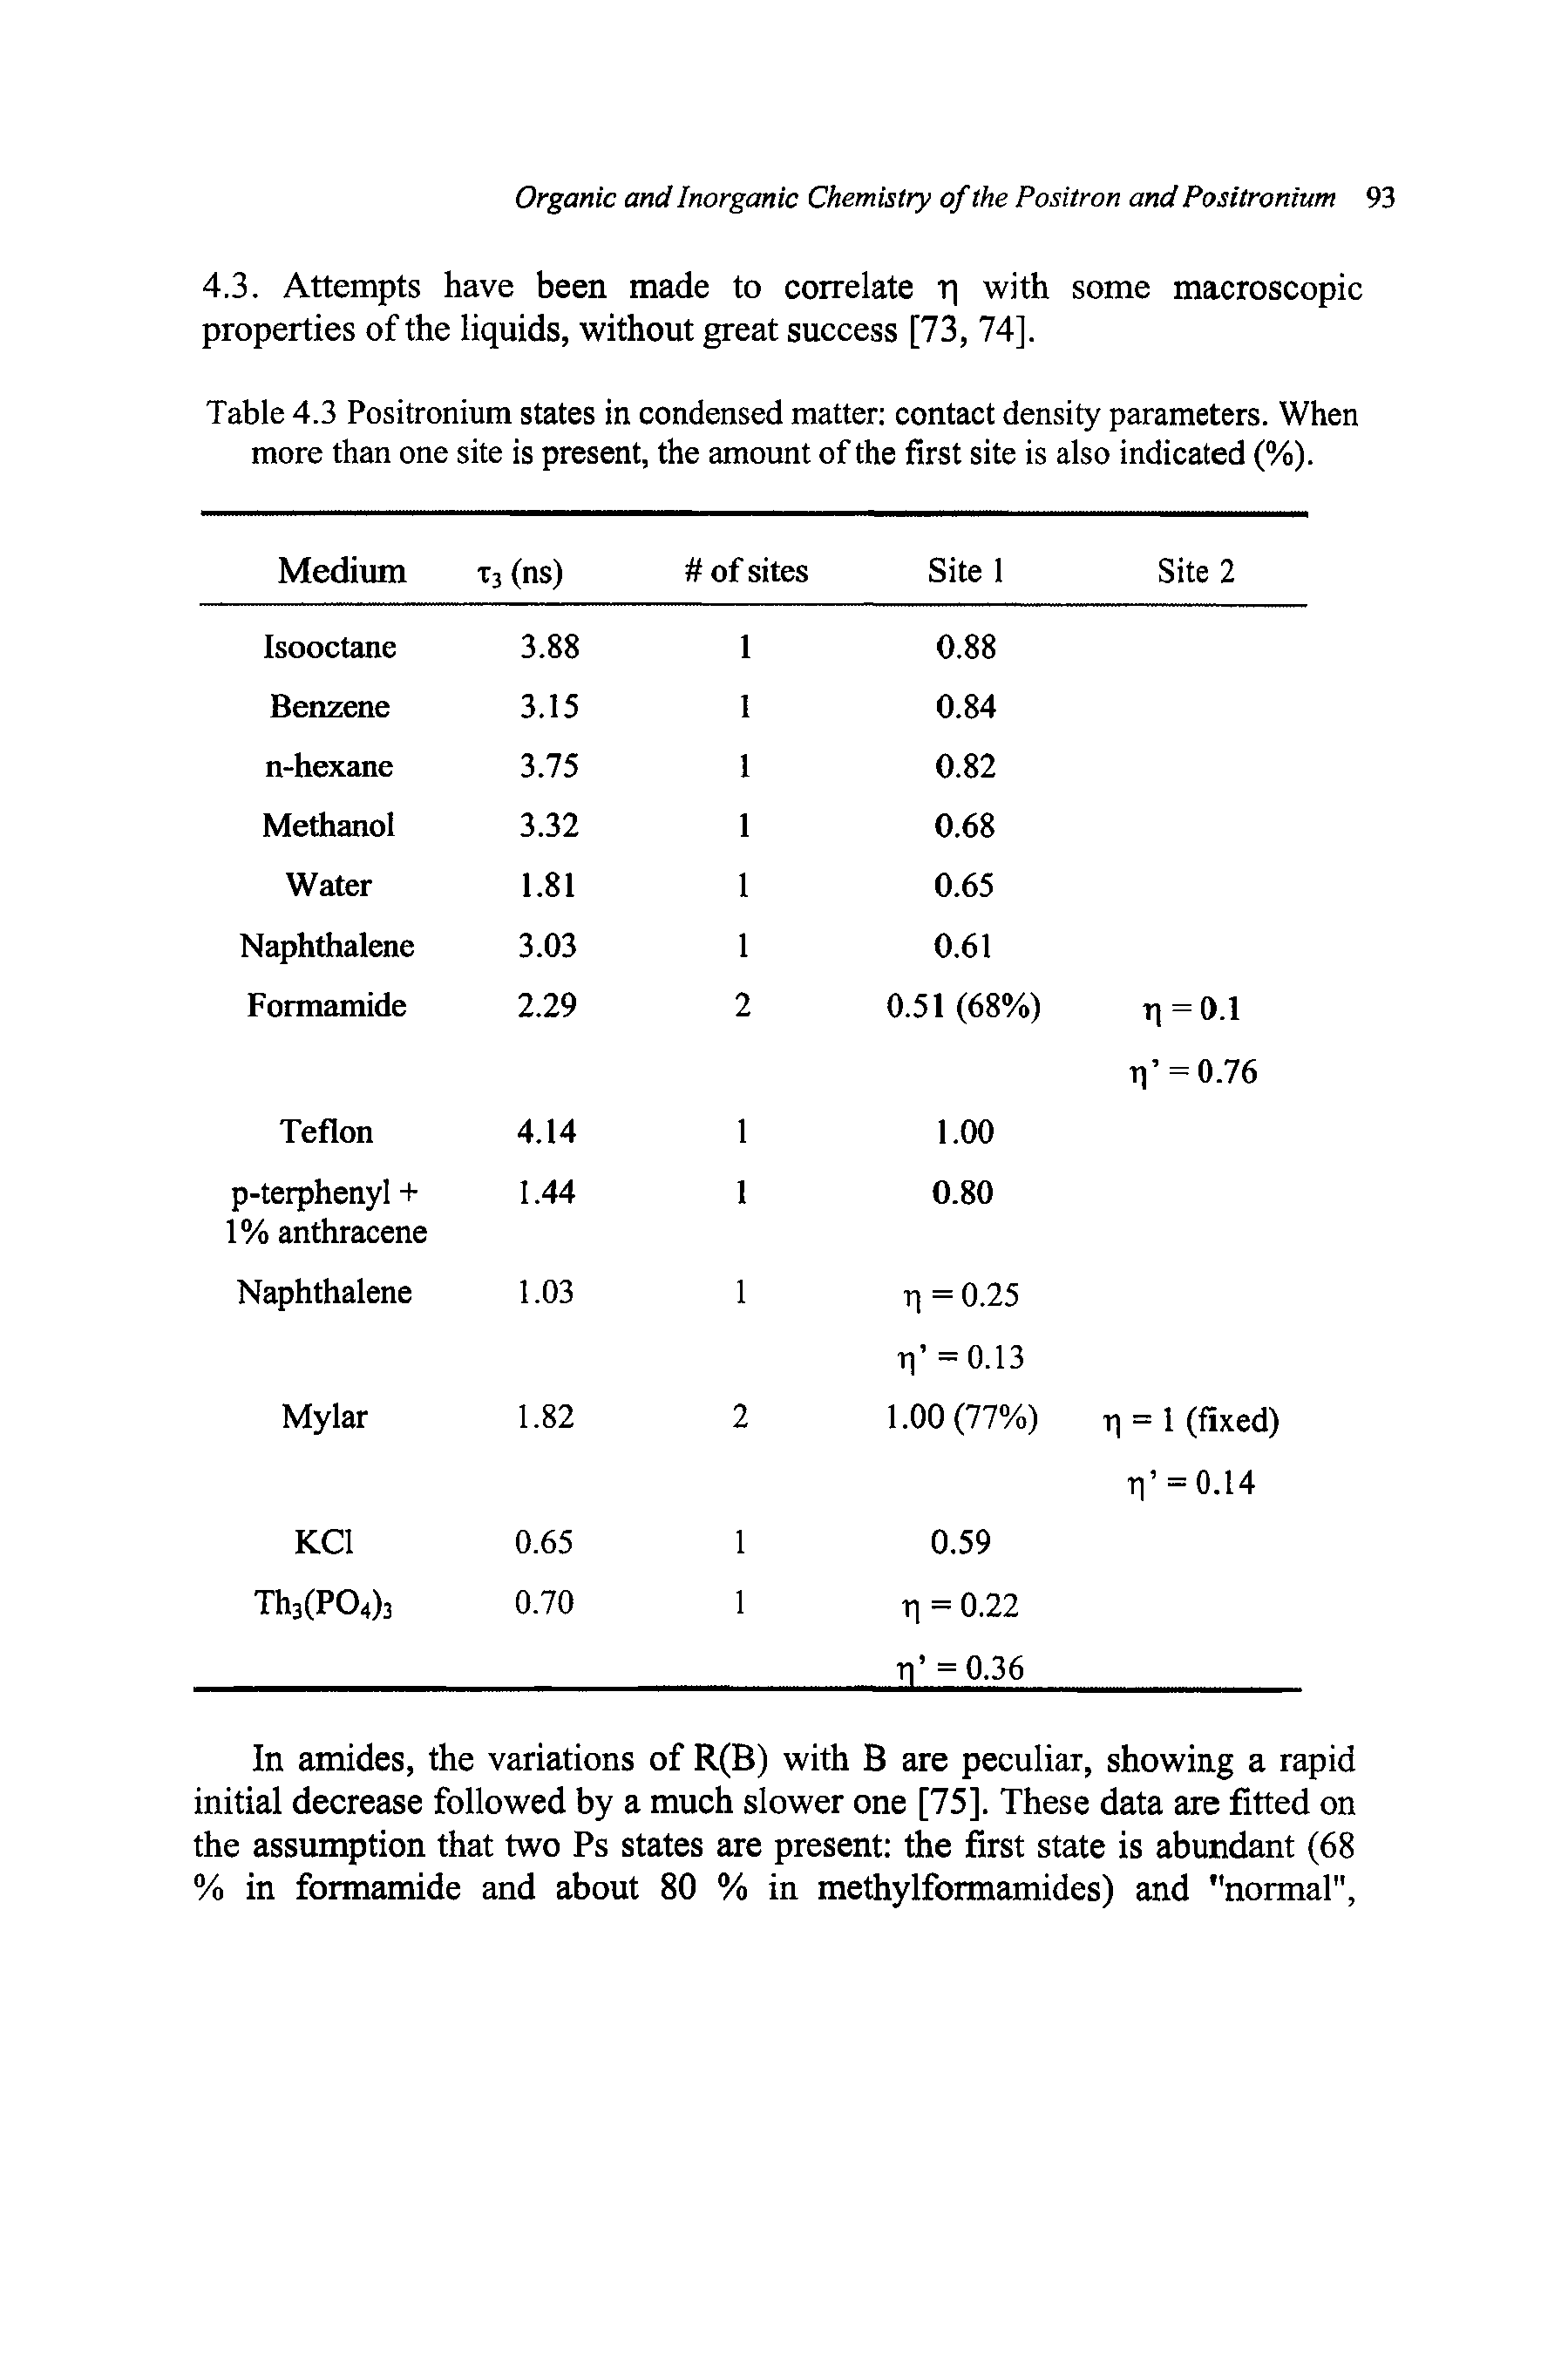 Table 4.3 Positronium states in condensed matter contact density parameters. When more than one site is present, the amount of the first site is also indicated (%).